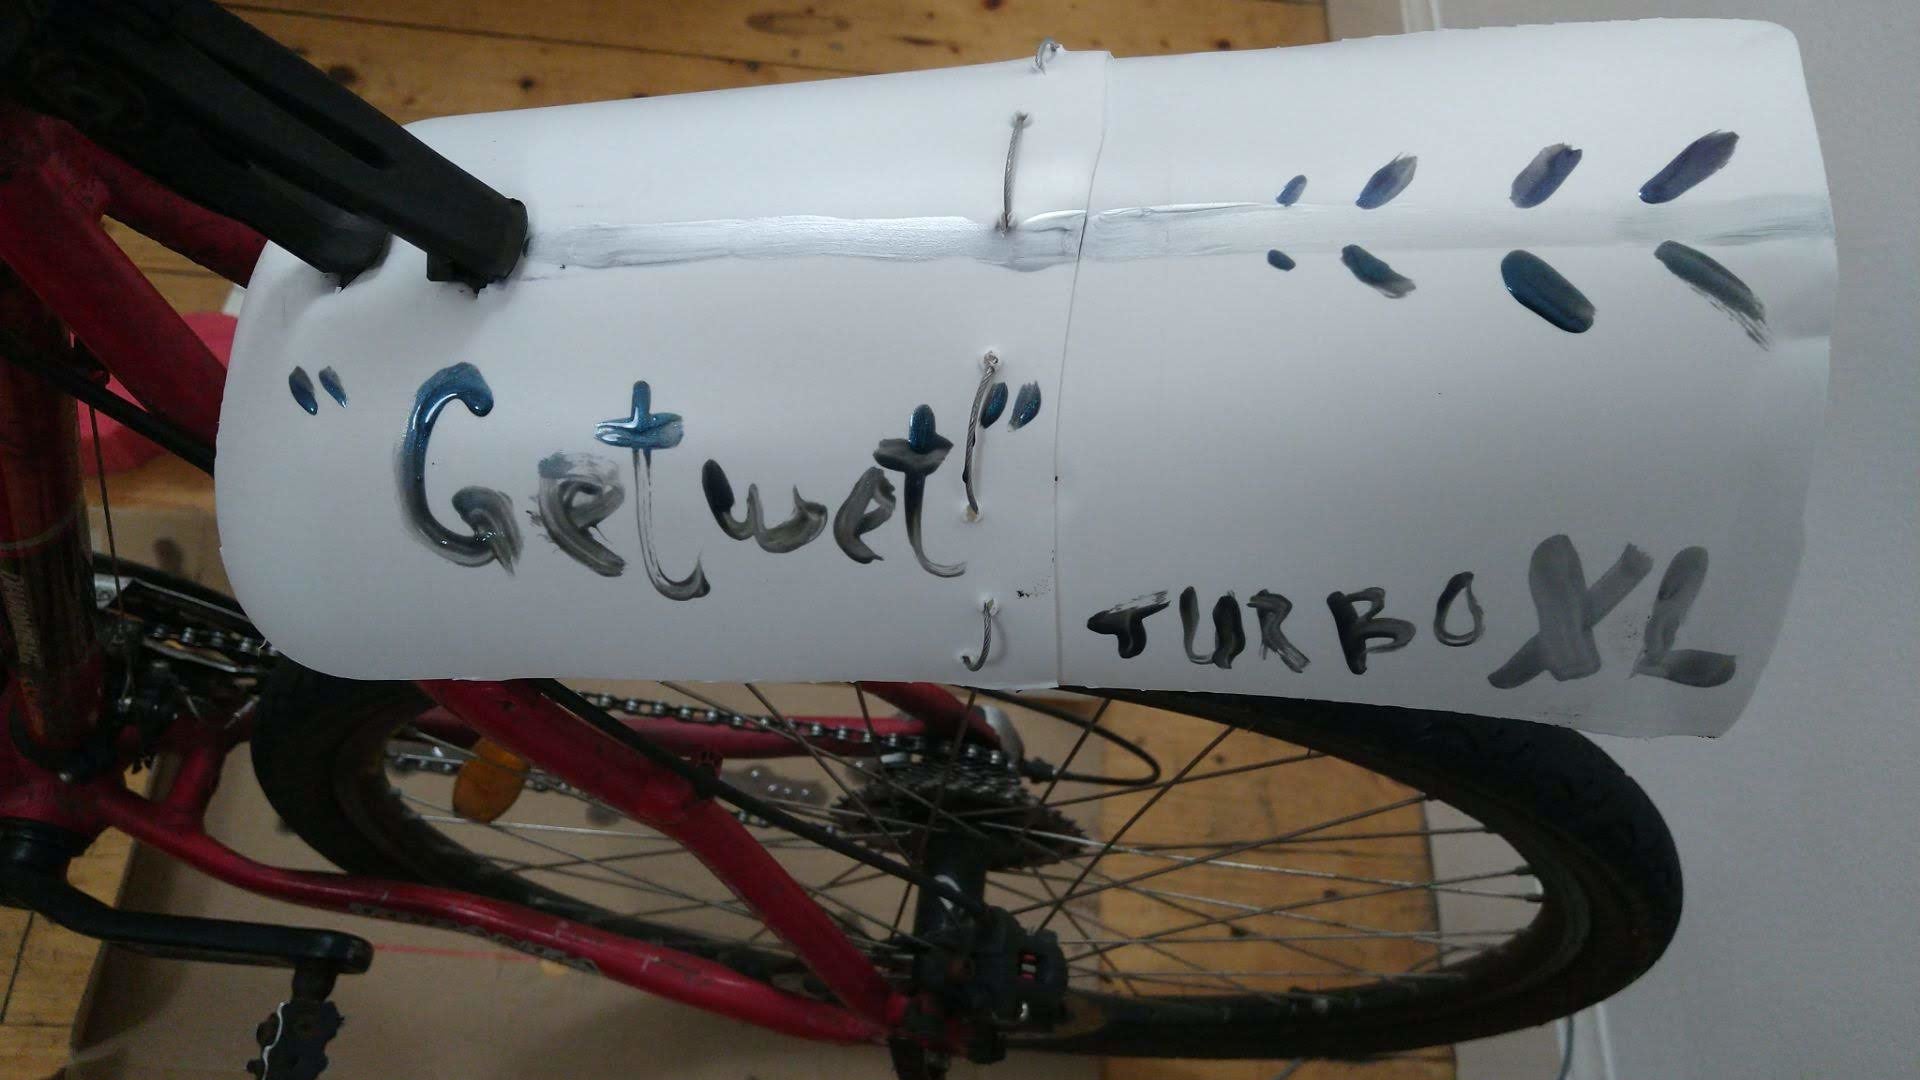 A picture of the temporary fender I made for my bike.